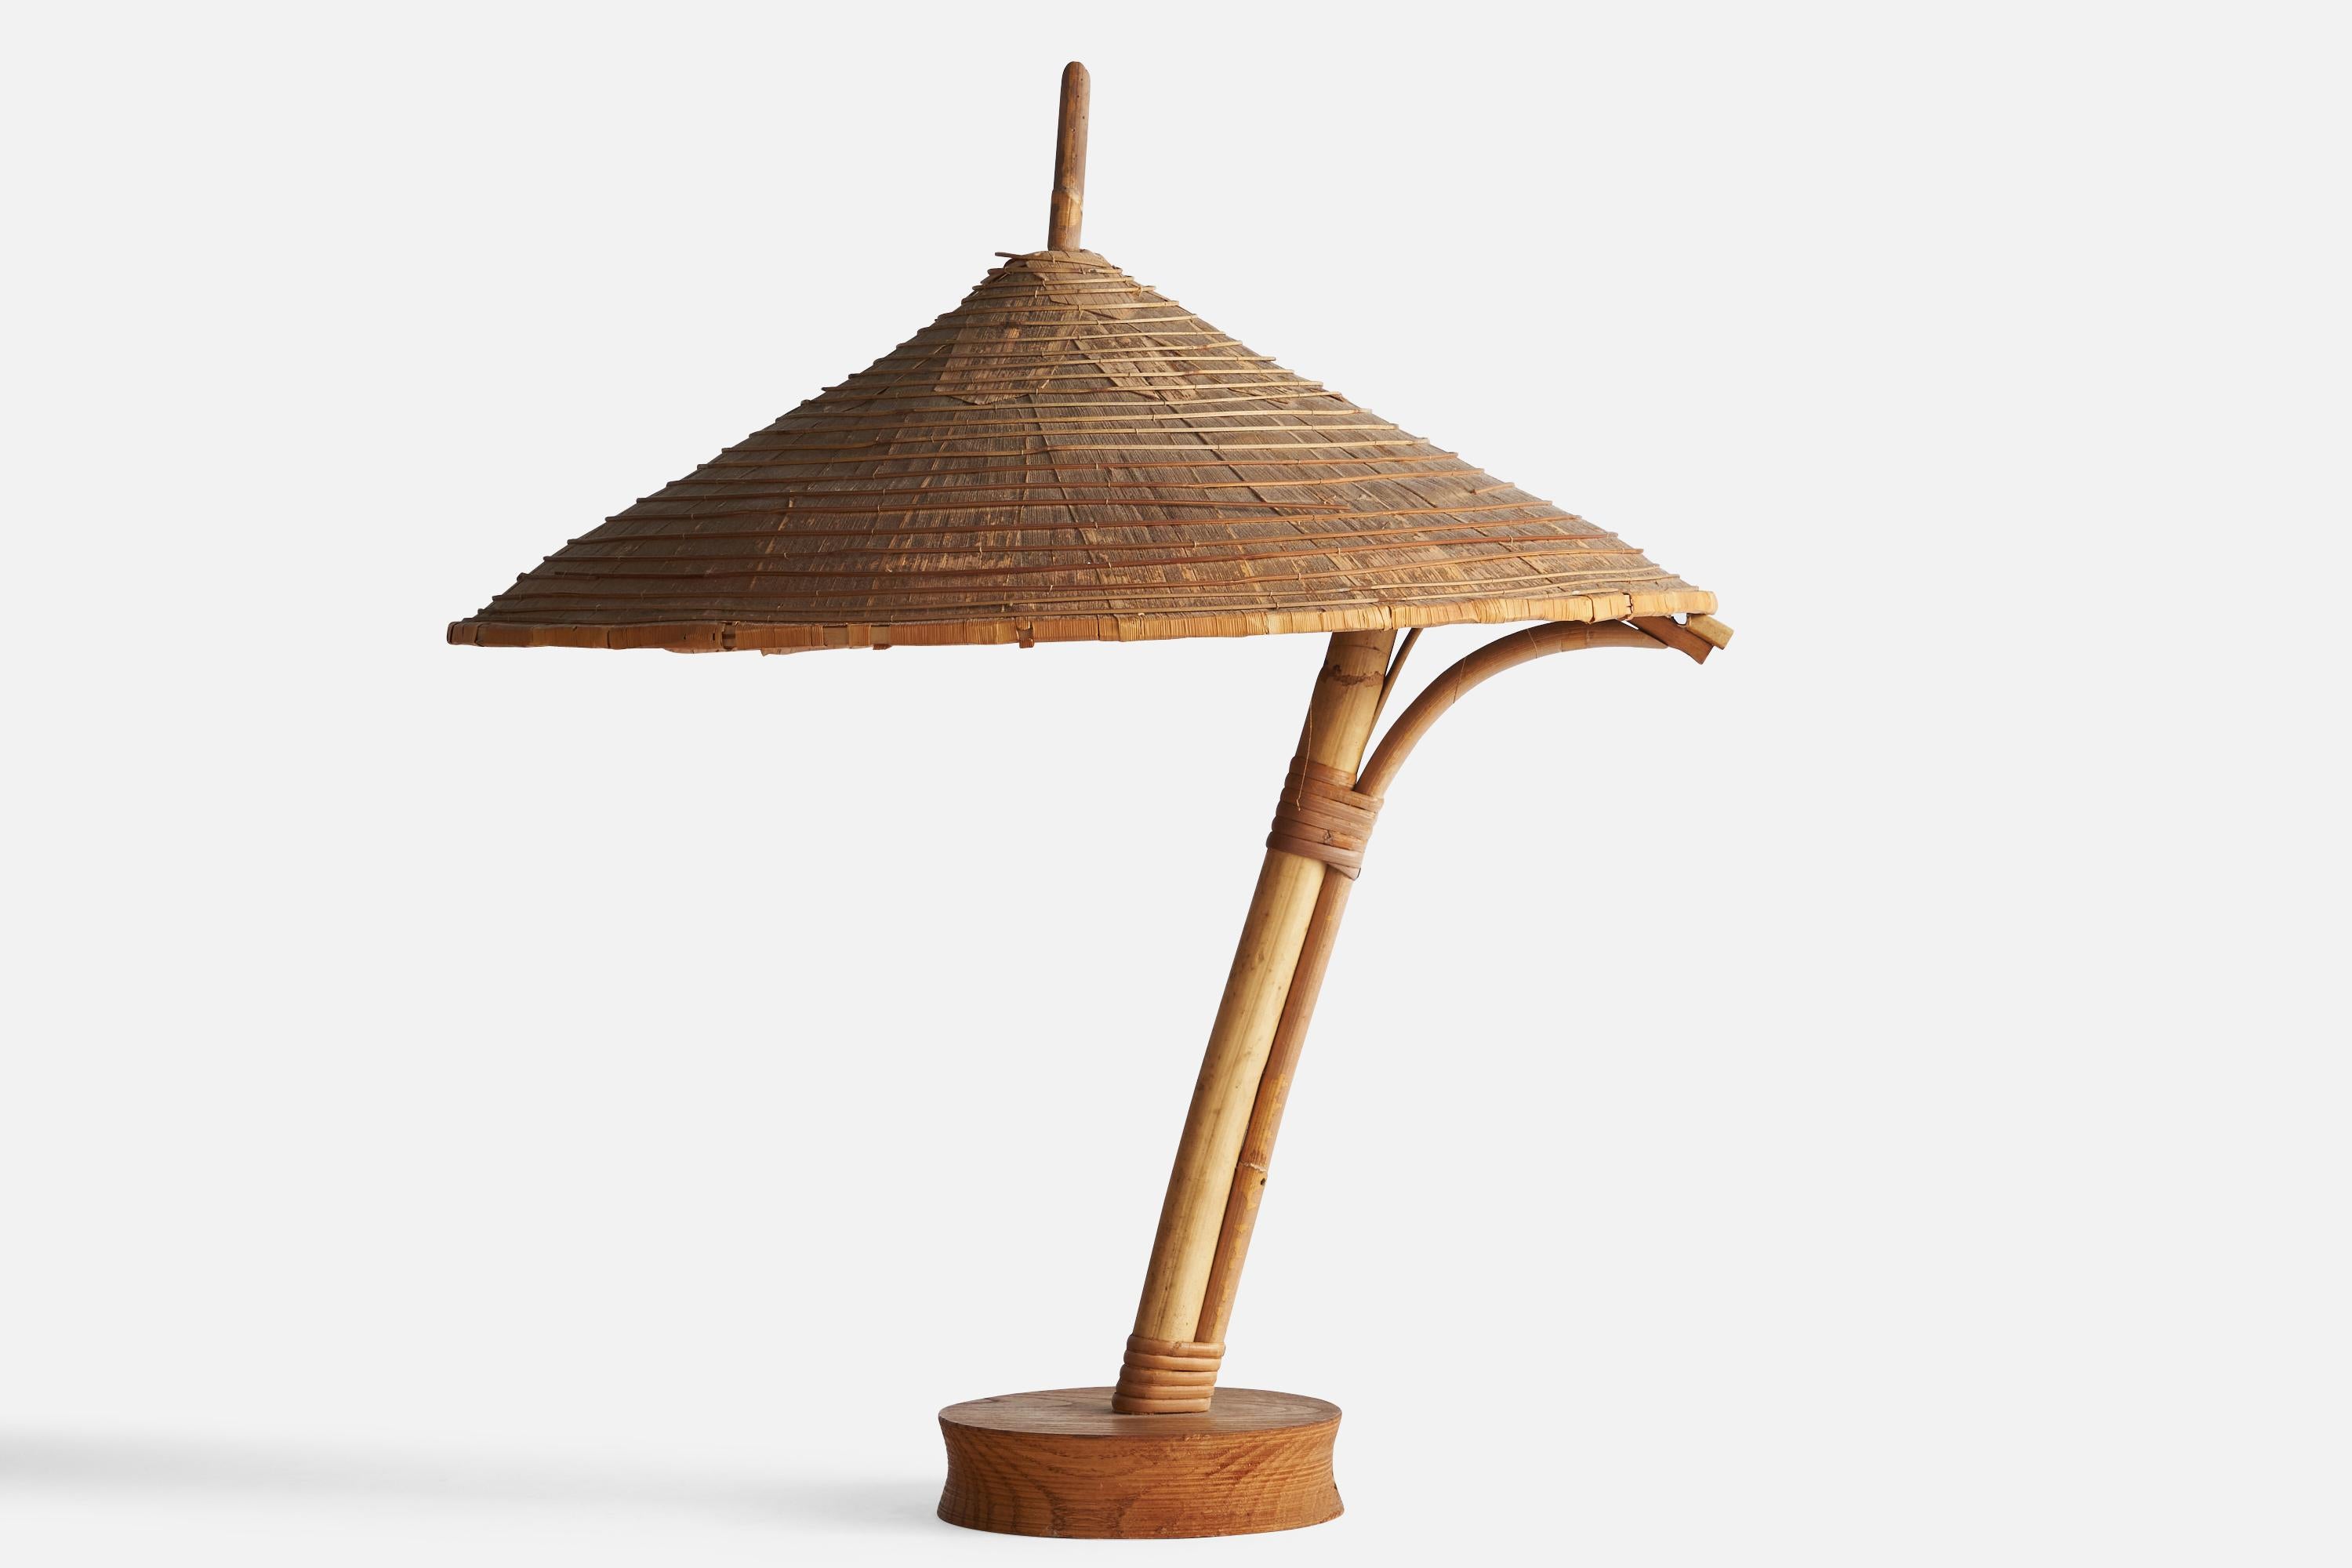 A bamboo, rattan and walnut table lamp designed and produced in the US, c. 1950s.

Overall Dimensions (inches): 20.8” H x 18” W x 18.5” D
Bulb Specifications: E-26 Bulb
Number of Sockets: 1
All lighting will be converted for US usage. We is unable